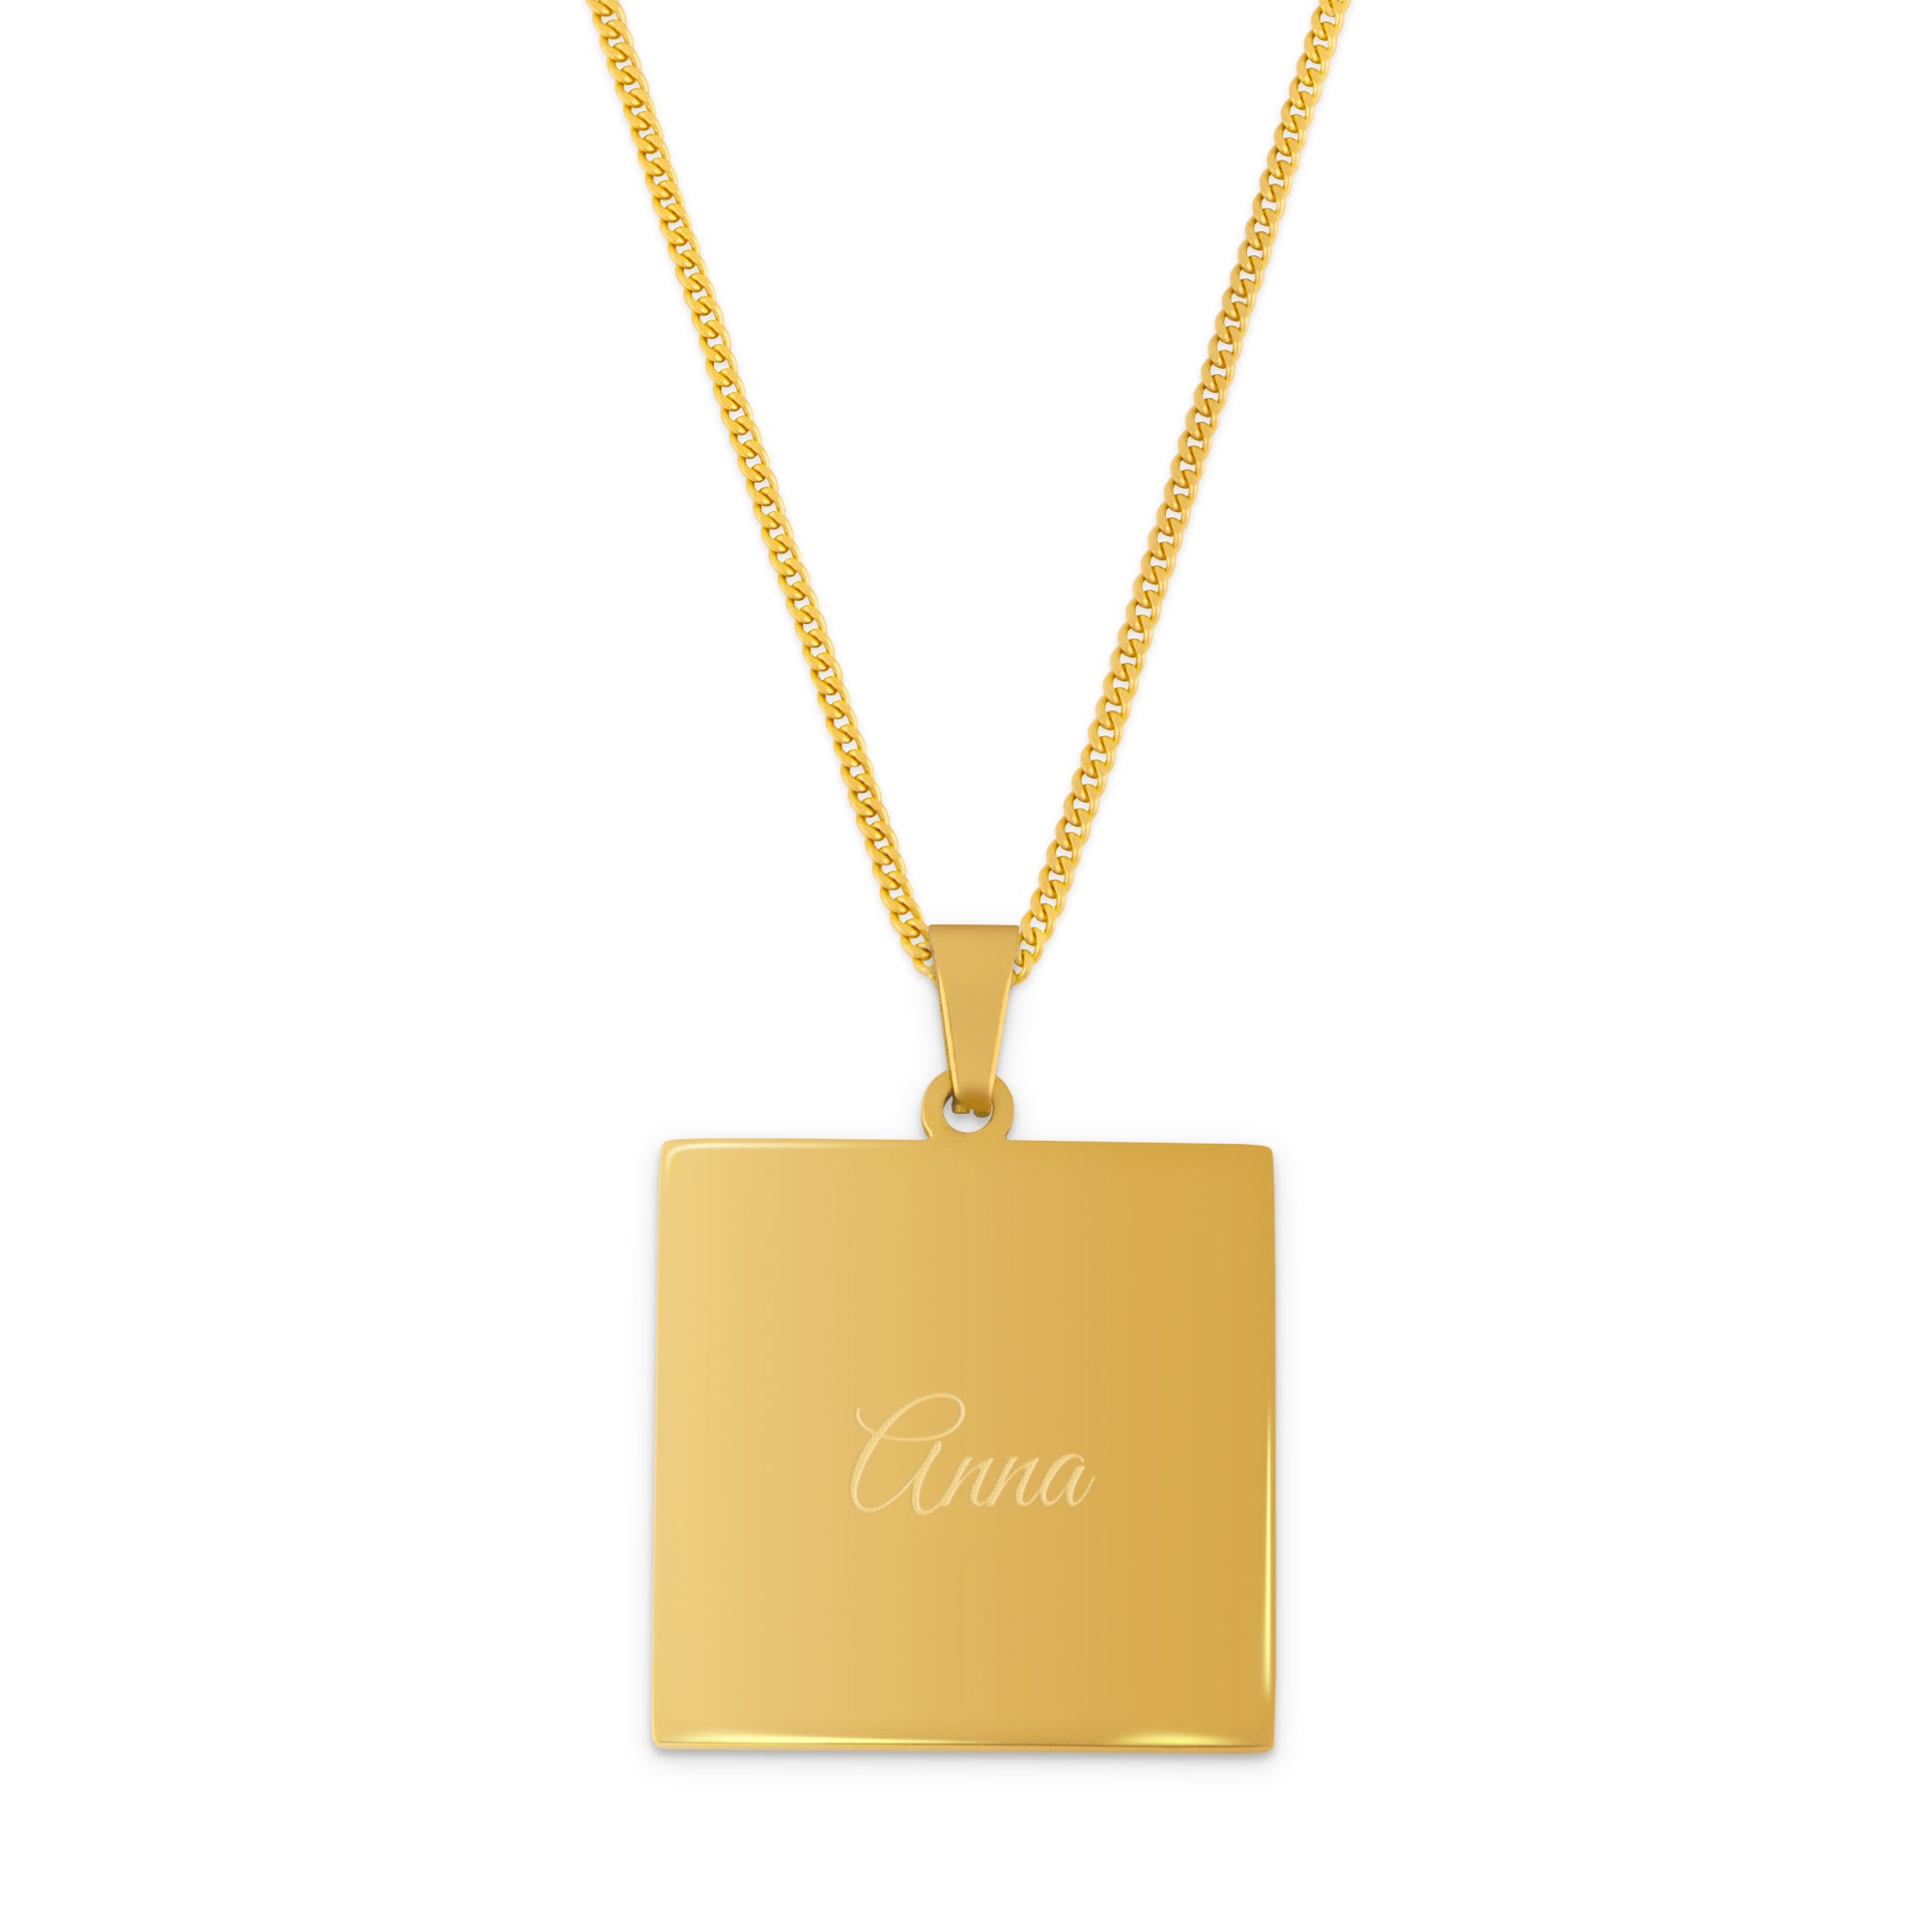 Necklace square pendant with name - gold